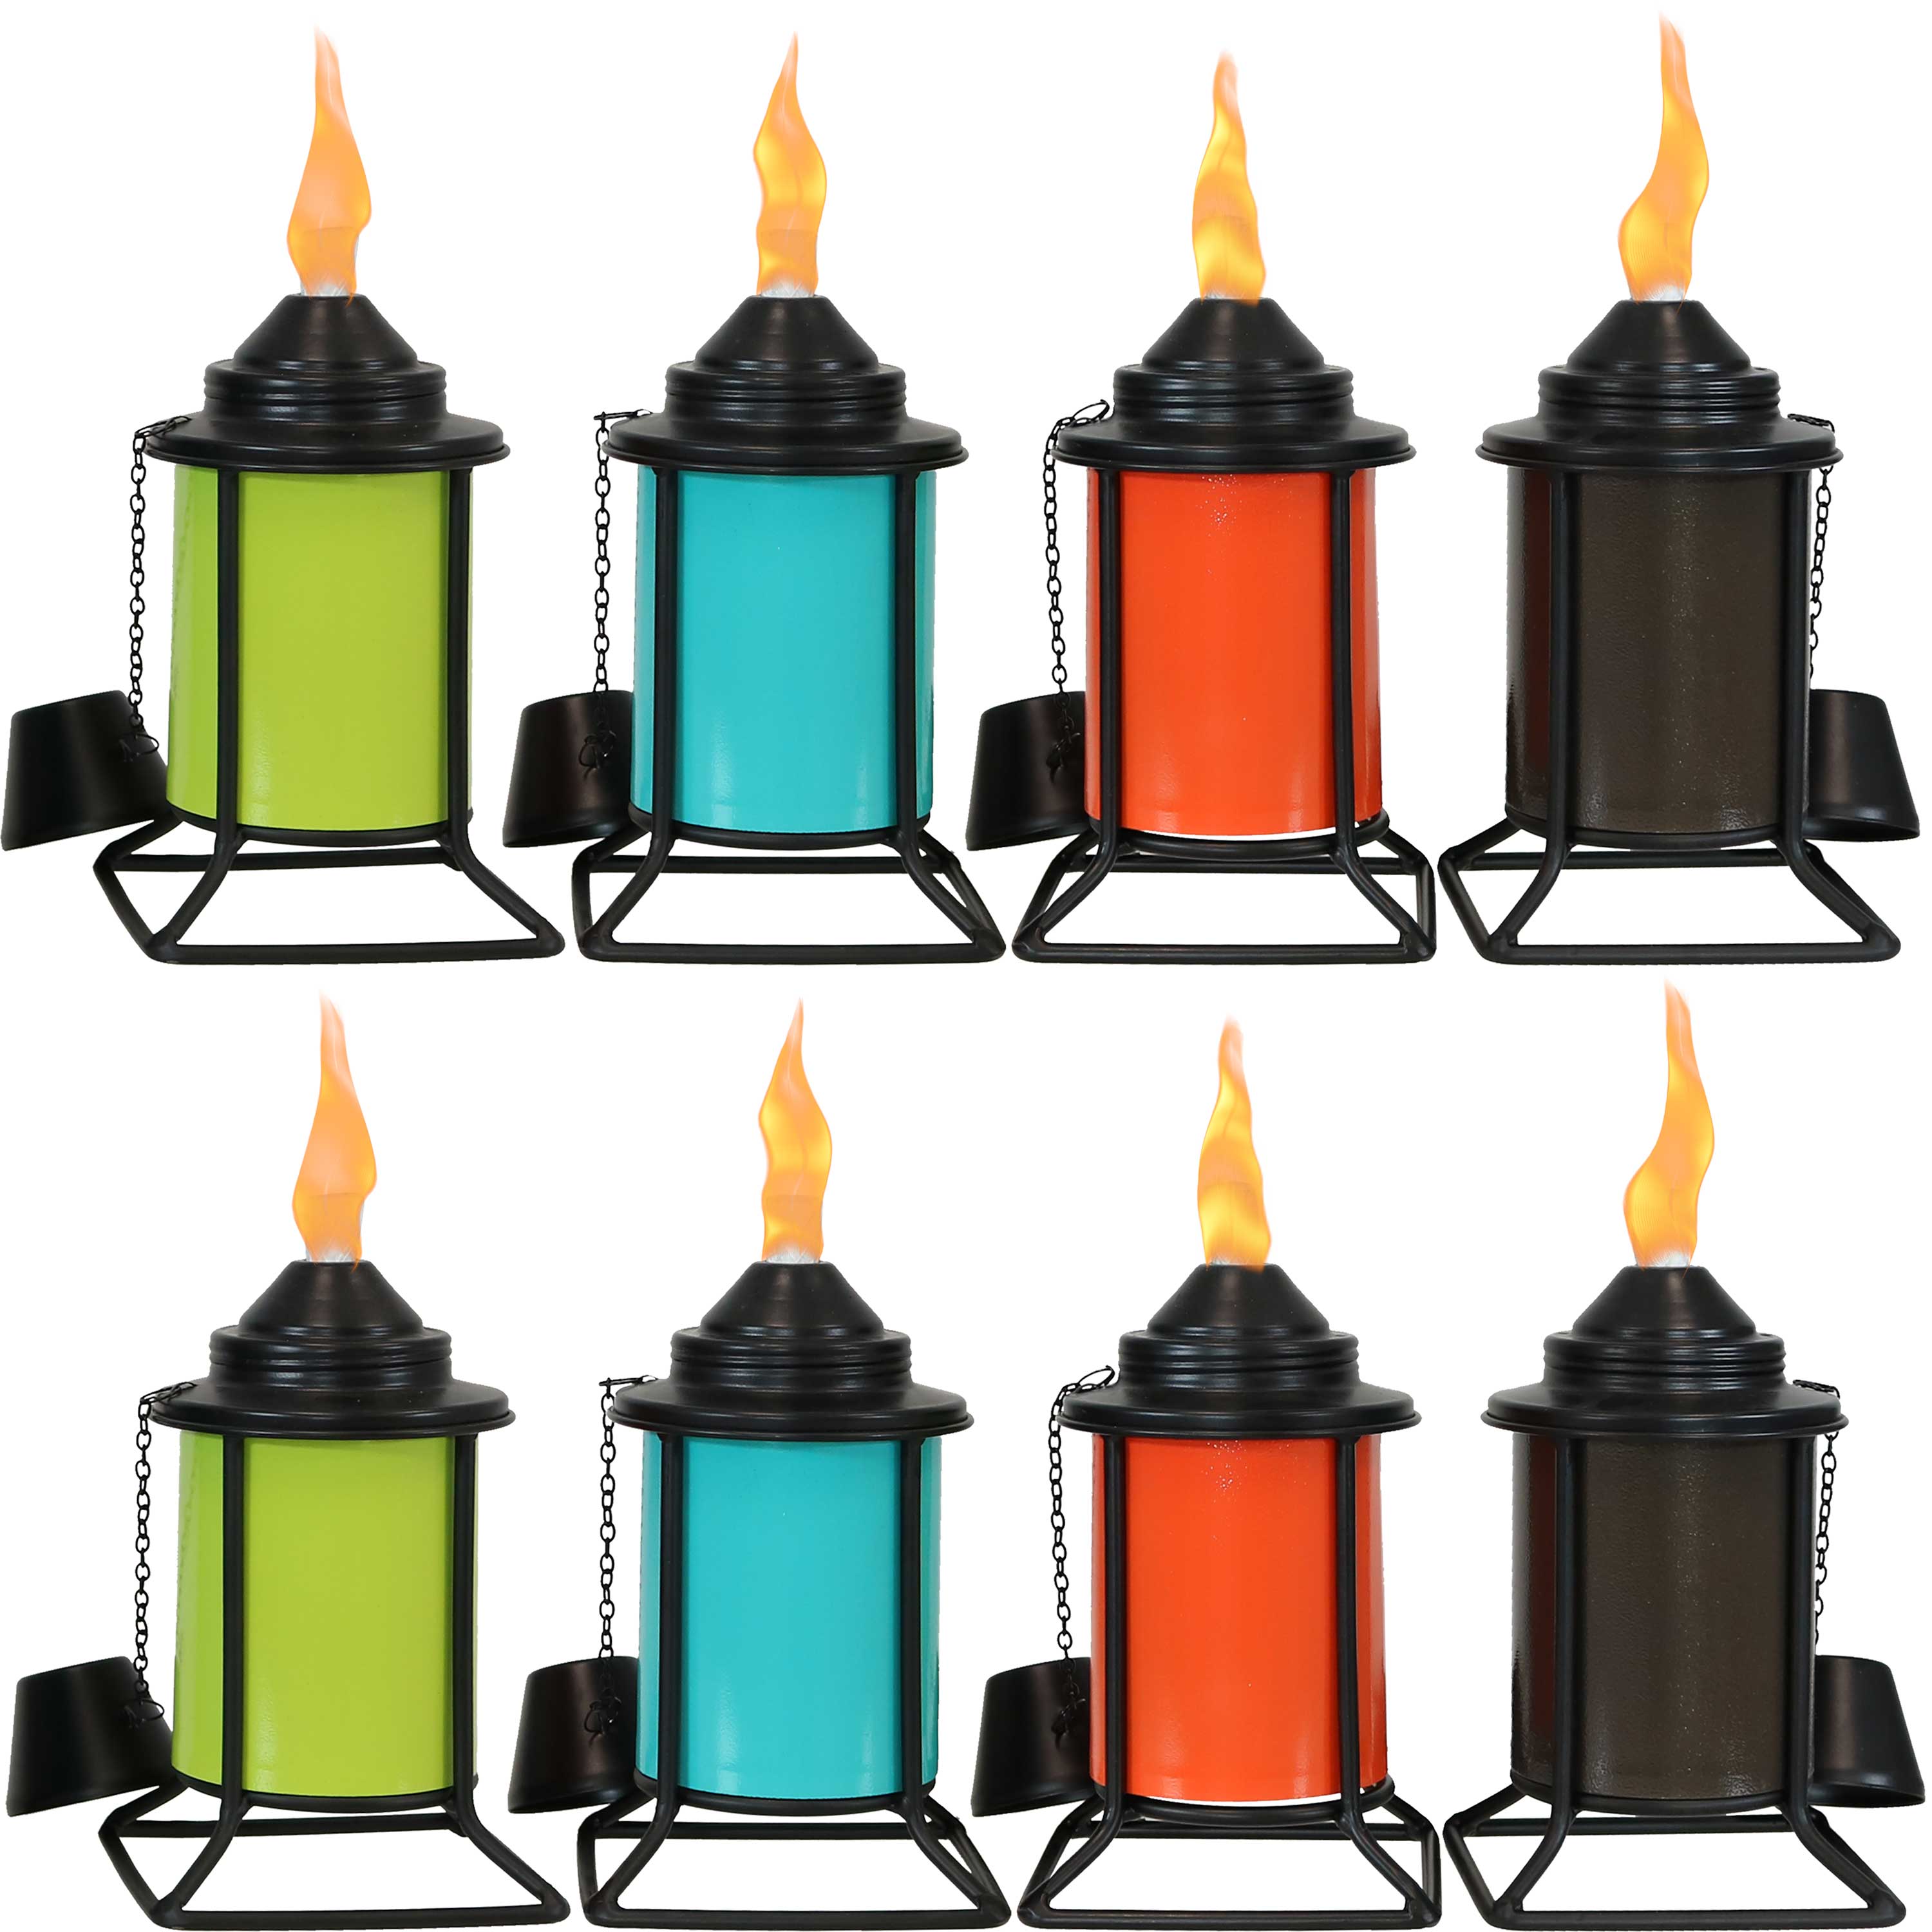 Glass Square Outdoor Tabletop Torches - Multi - Set of 8